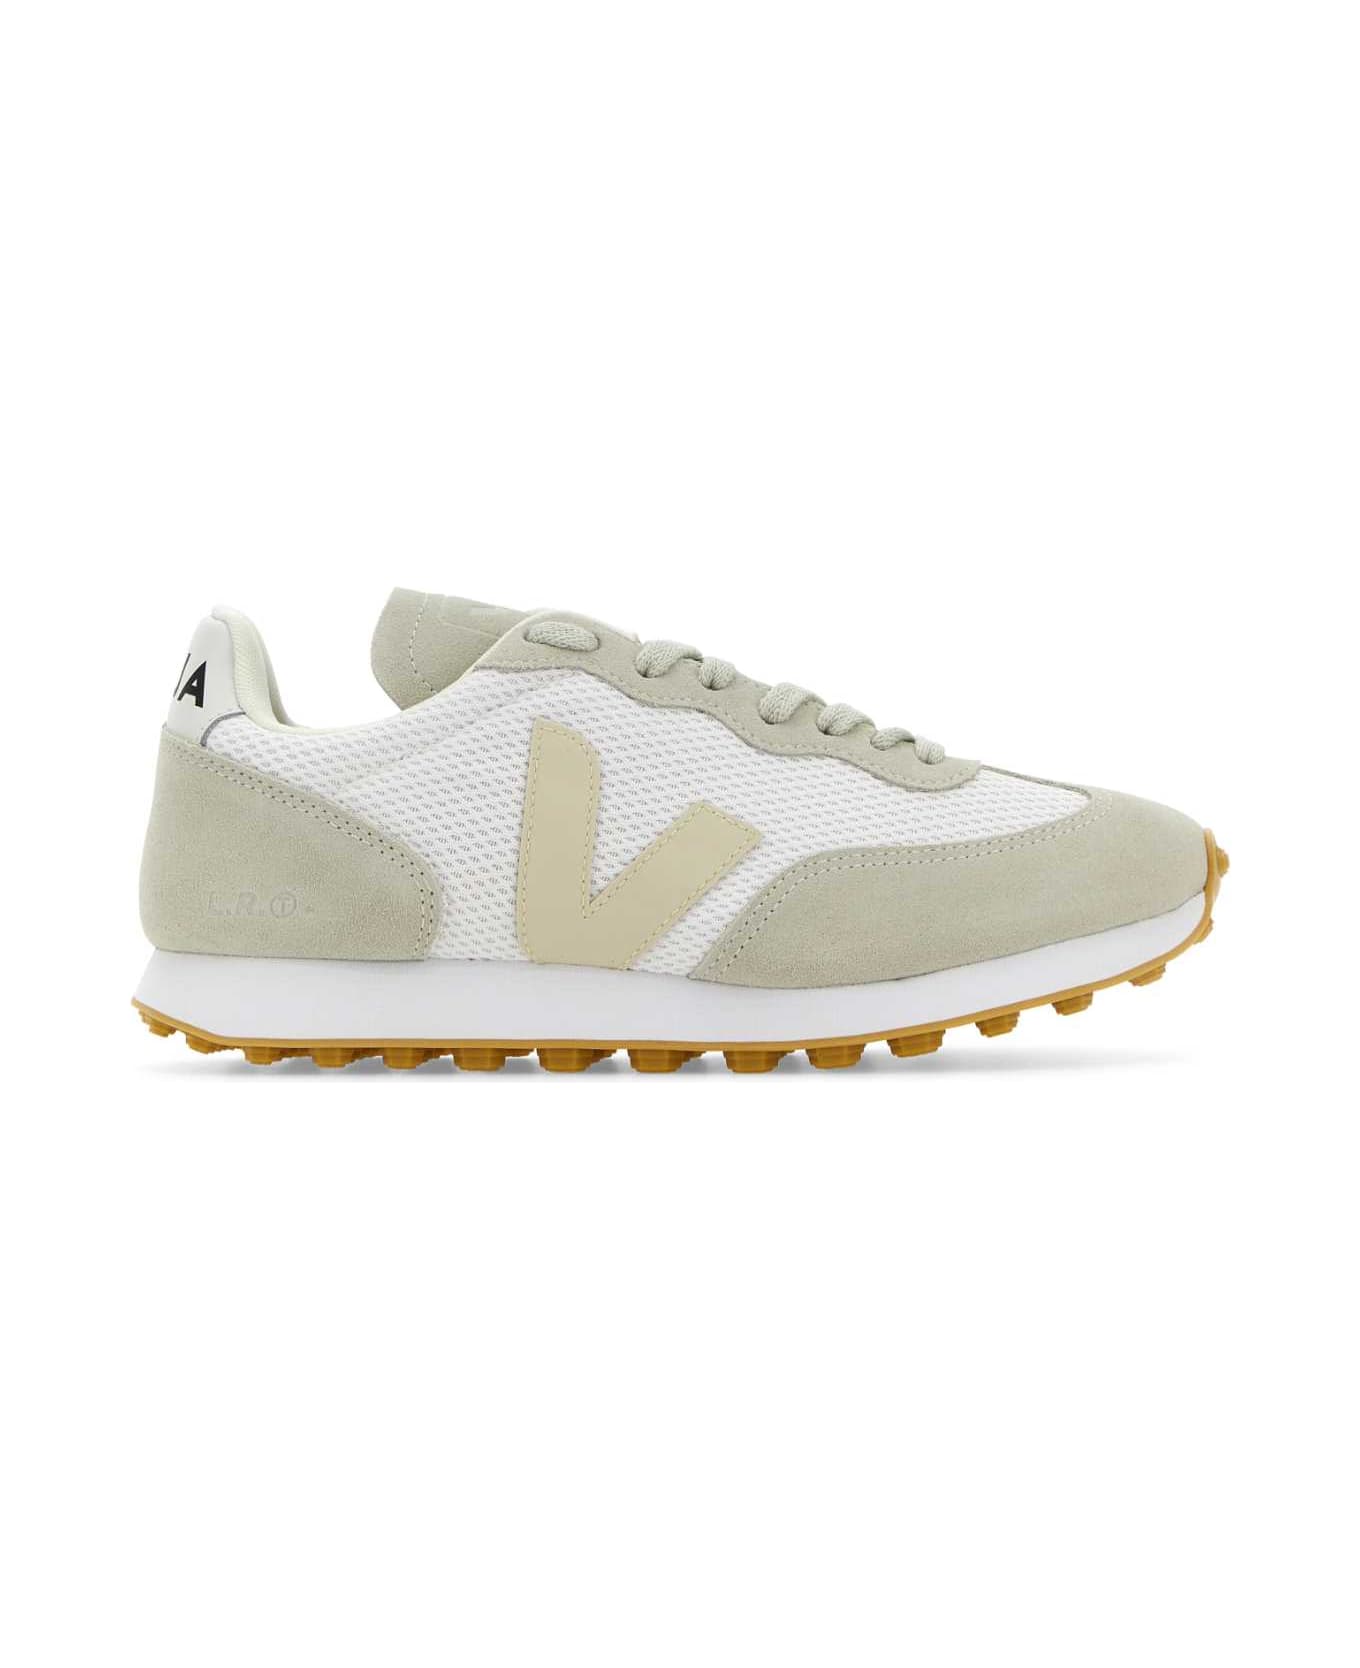 Veja Two-tones Polyester And Suede Rio Branco Sneakers - WHITEPIERRENATURAL